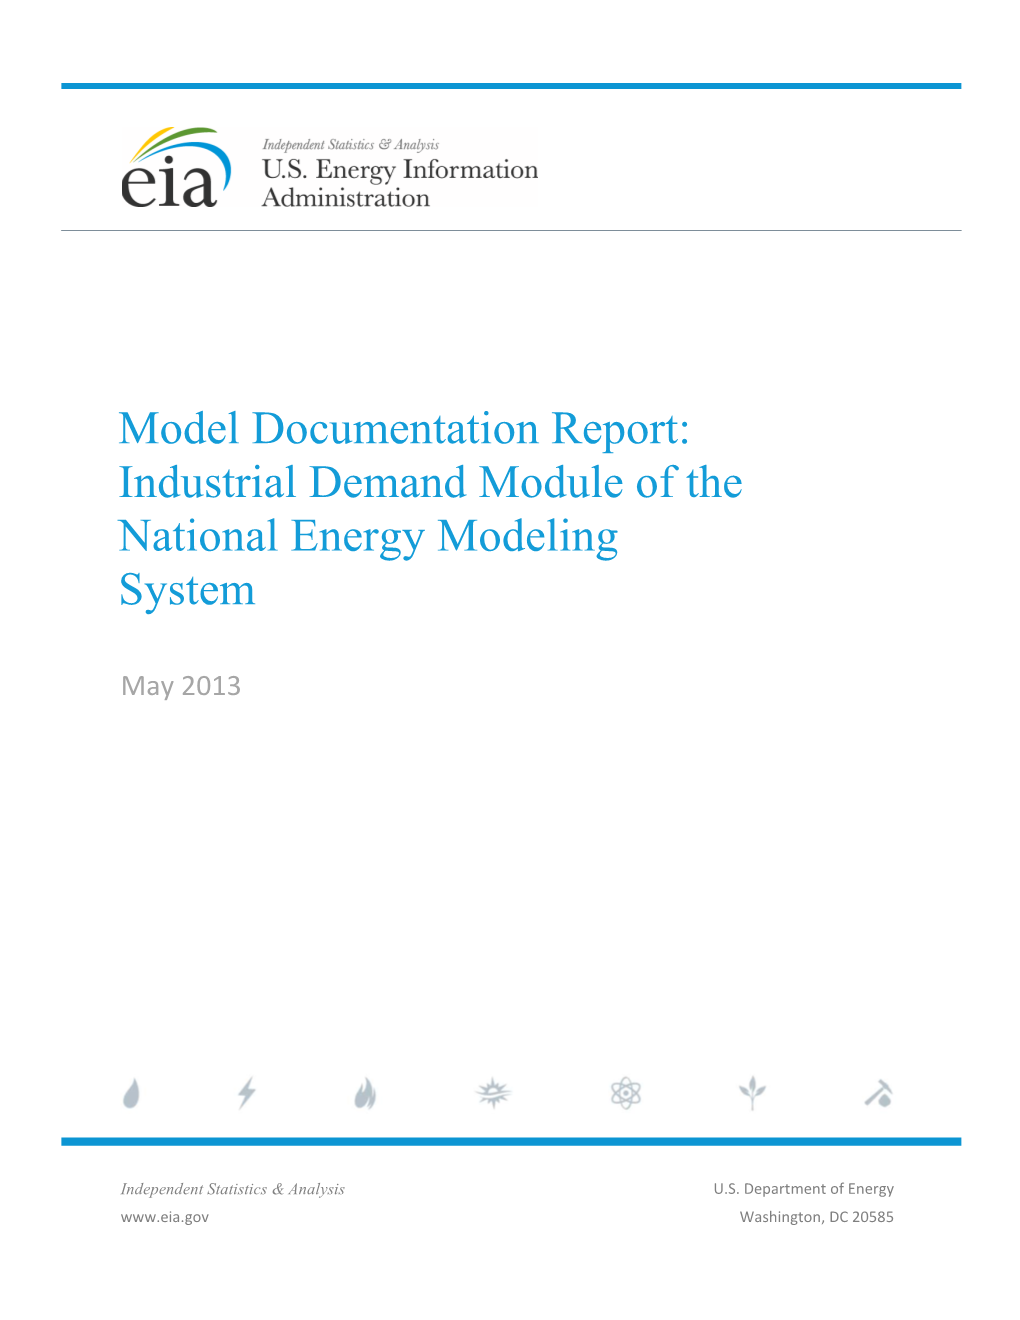 Industrial Demand Module of the National Energy Modeling System